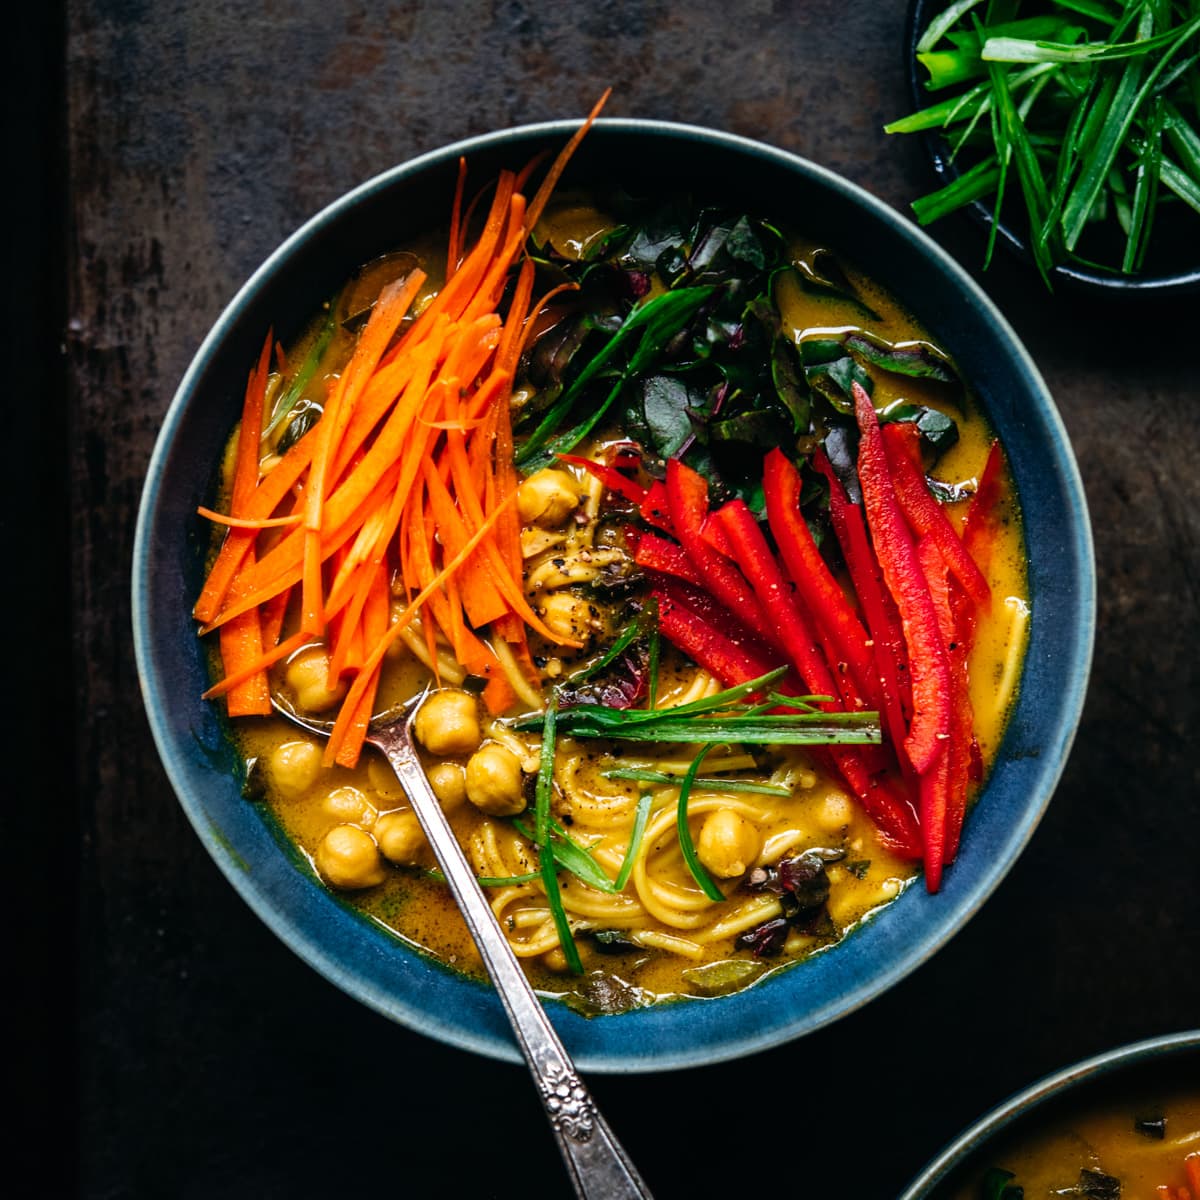 https://www.crowdedkitchen.com/wp-content/uploads/2021/01/turmeric-ginger-soup-featured.jpg